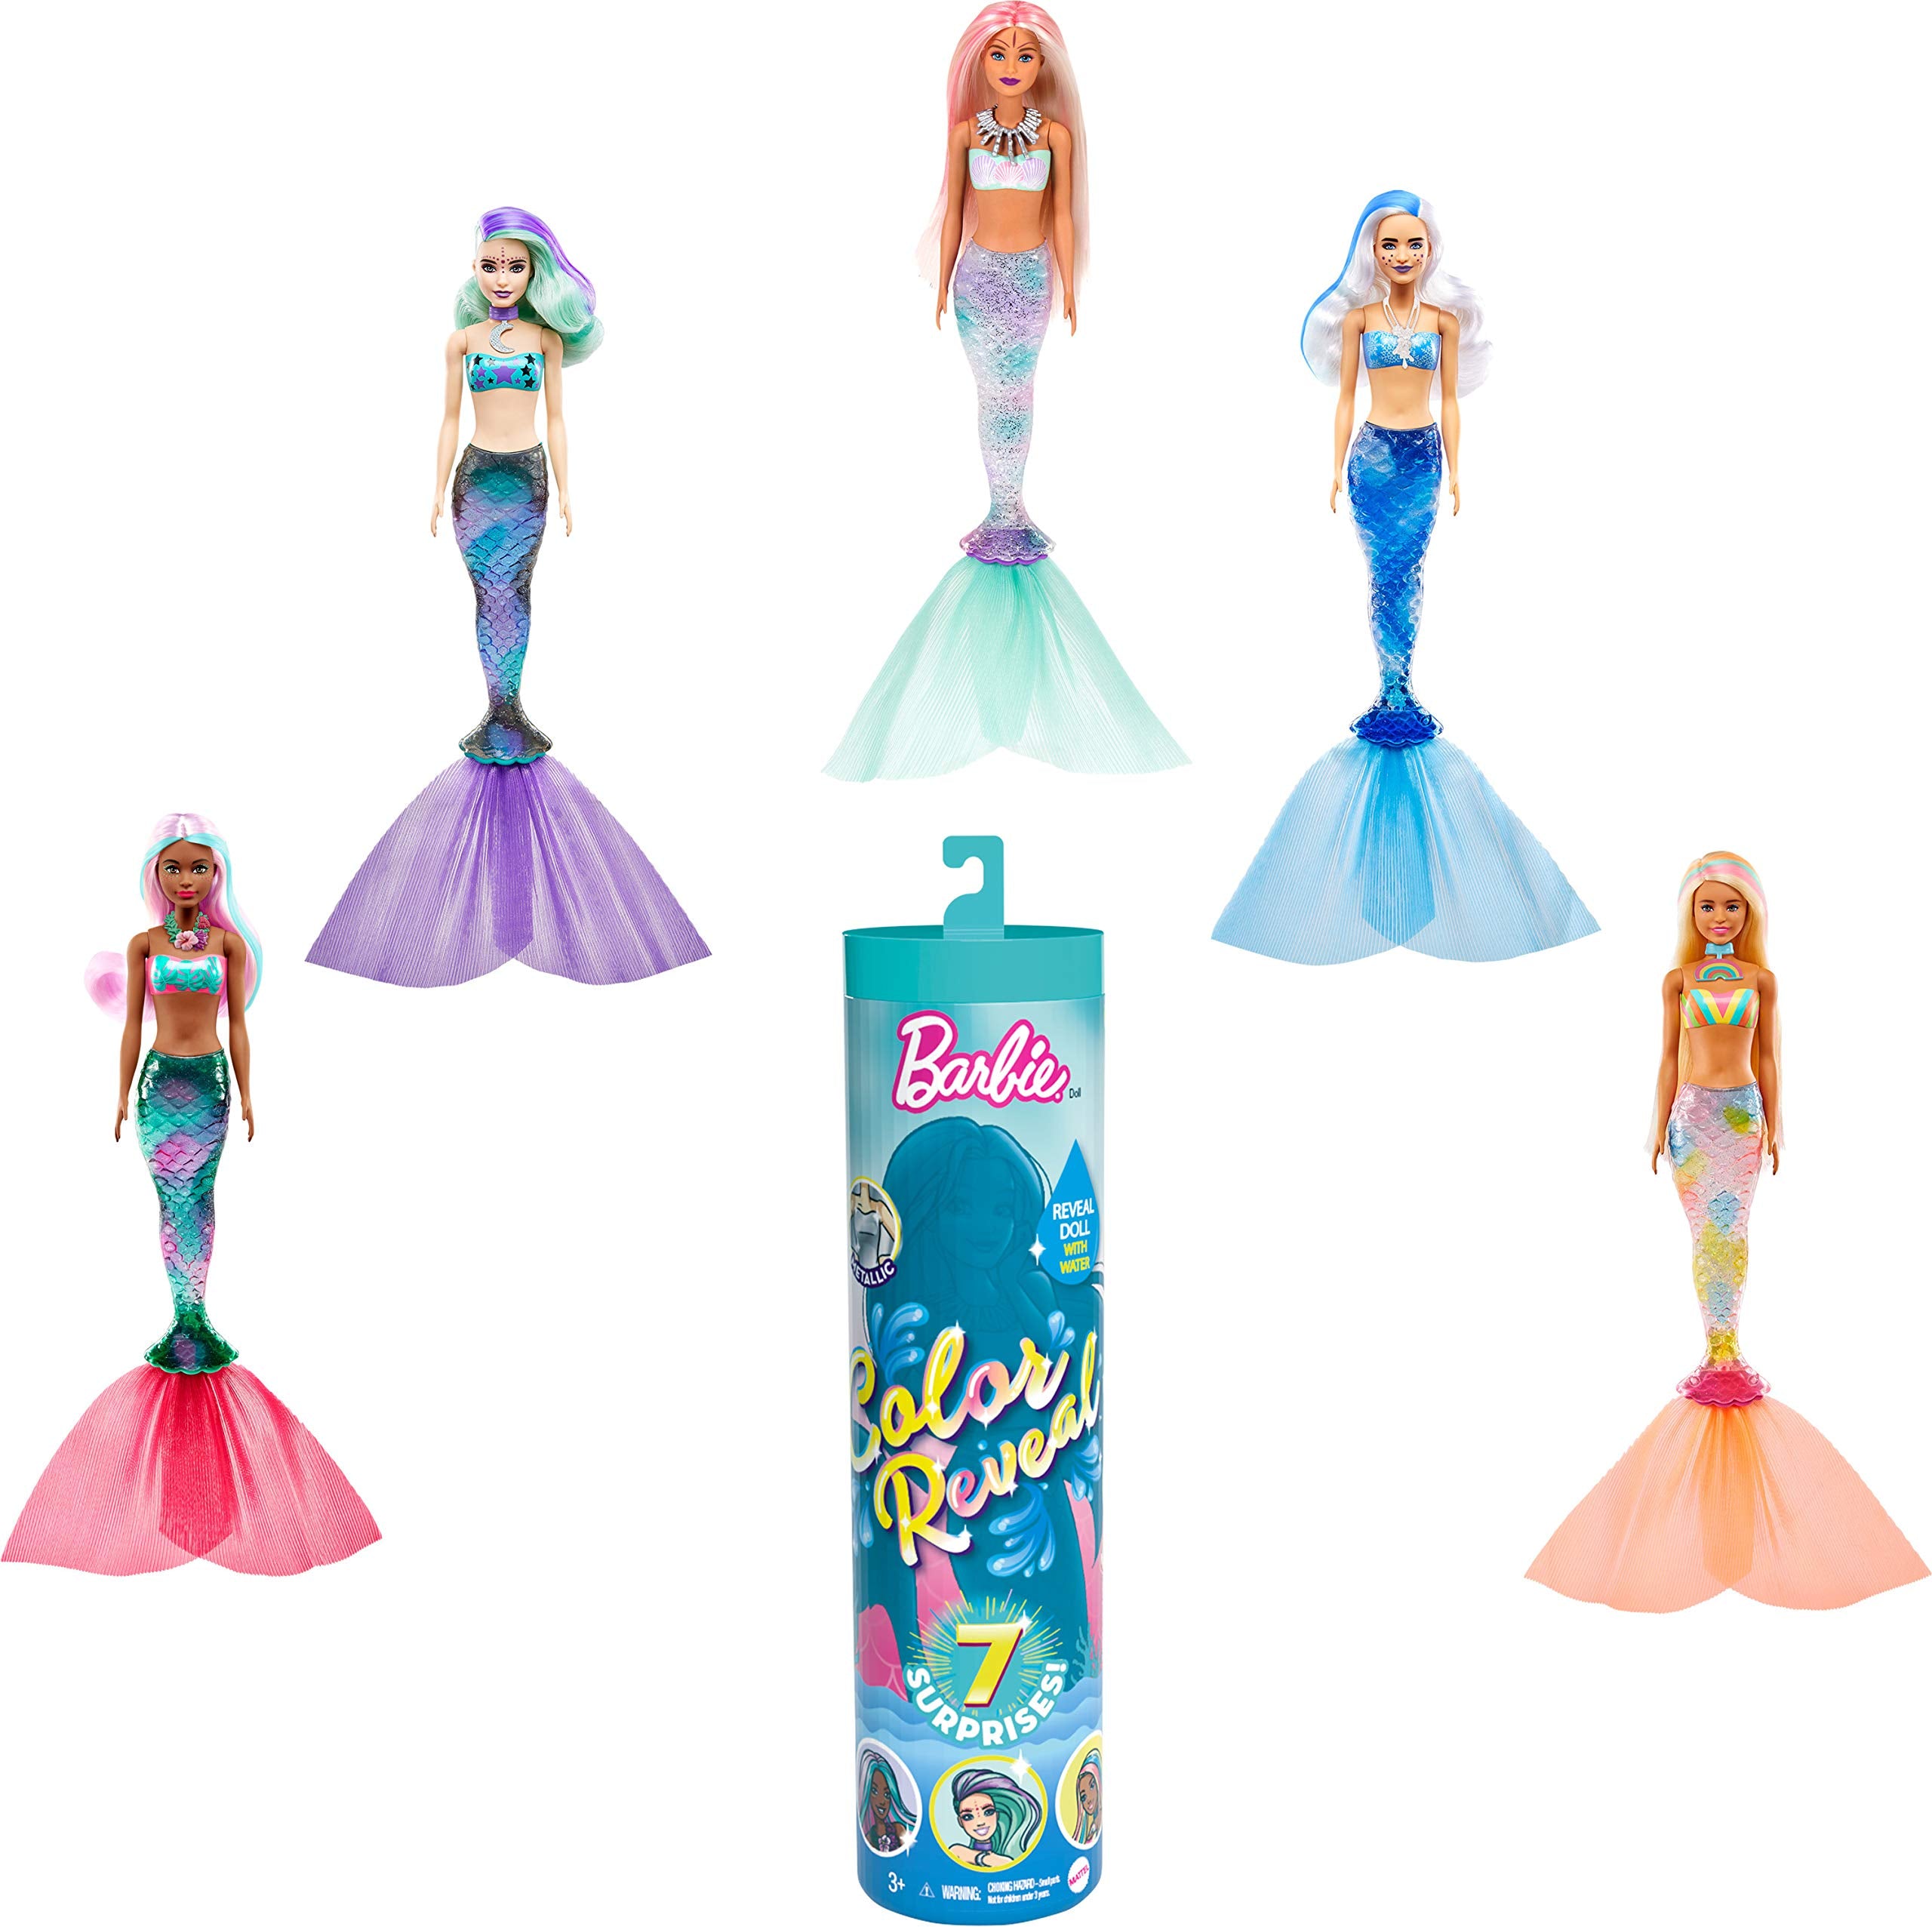 Barbie Color Reveal Doll & Accessories, 7 Surprises Including Mermaid Tail & Color-Change Hair & Face (Styles May Vary)